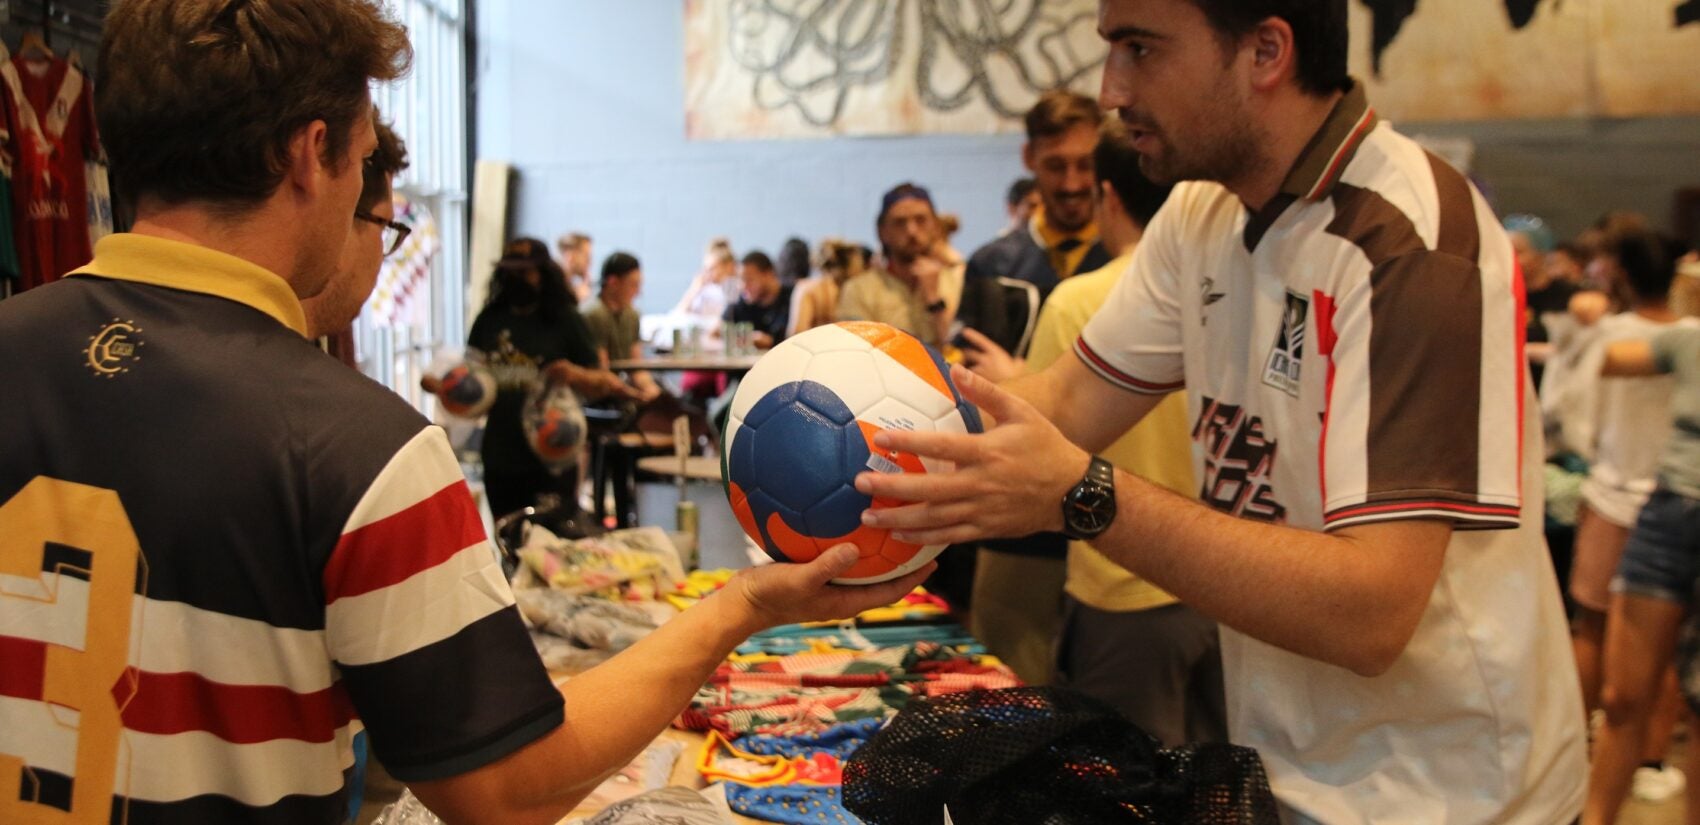 Players picked up their kits and soaked up the vibes during a pre-tournament gathering at Craft Hall on Friday. (Cory Sharber/WHYY)